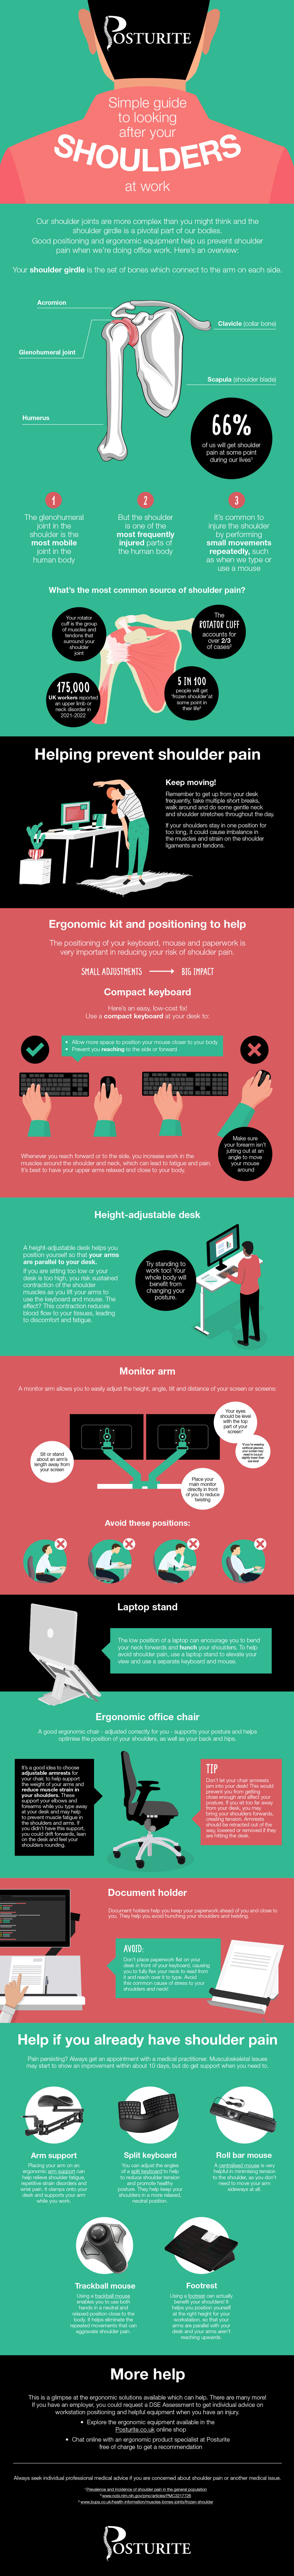 Click here to download our 'Looking after your shoulders at work' infographic